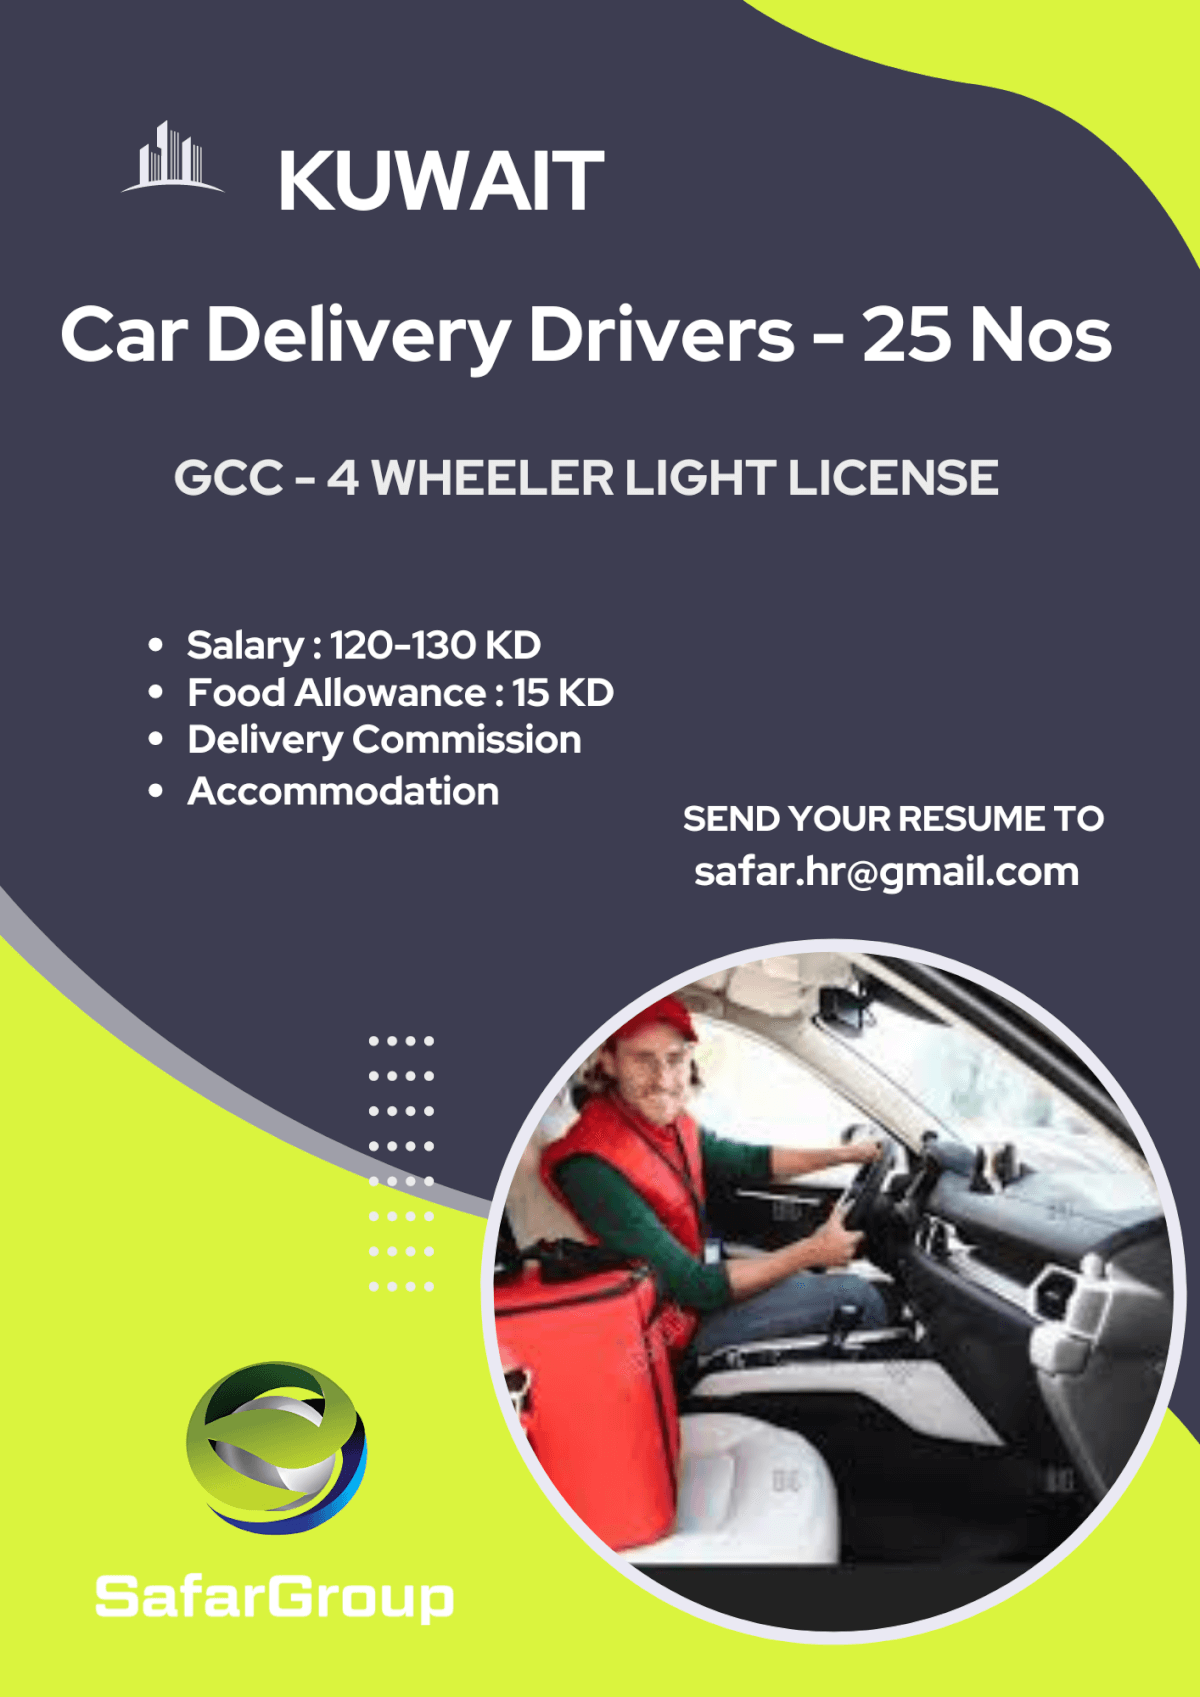 Car Delivery Drivers - Kuwait